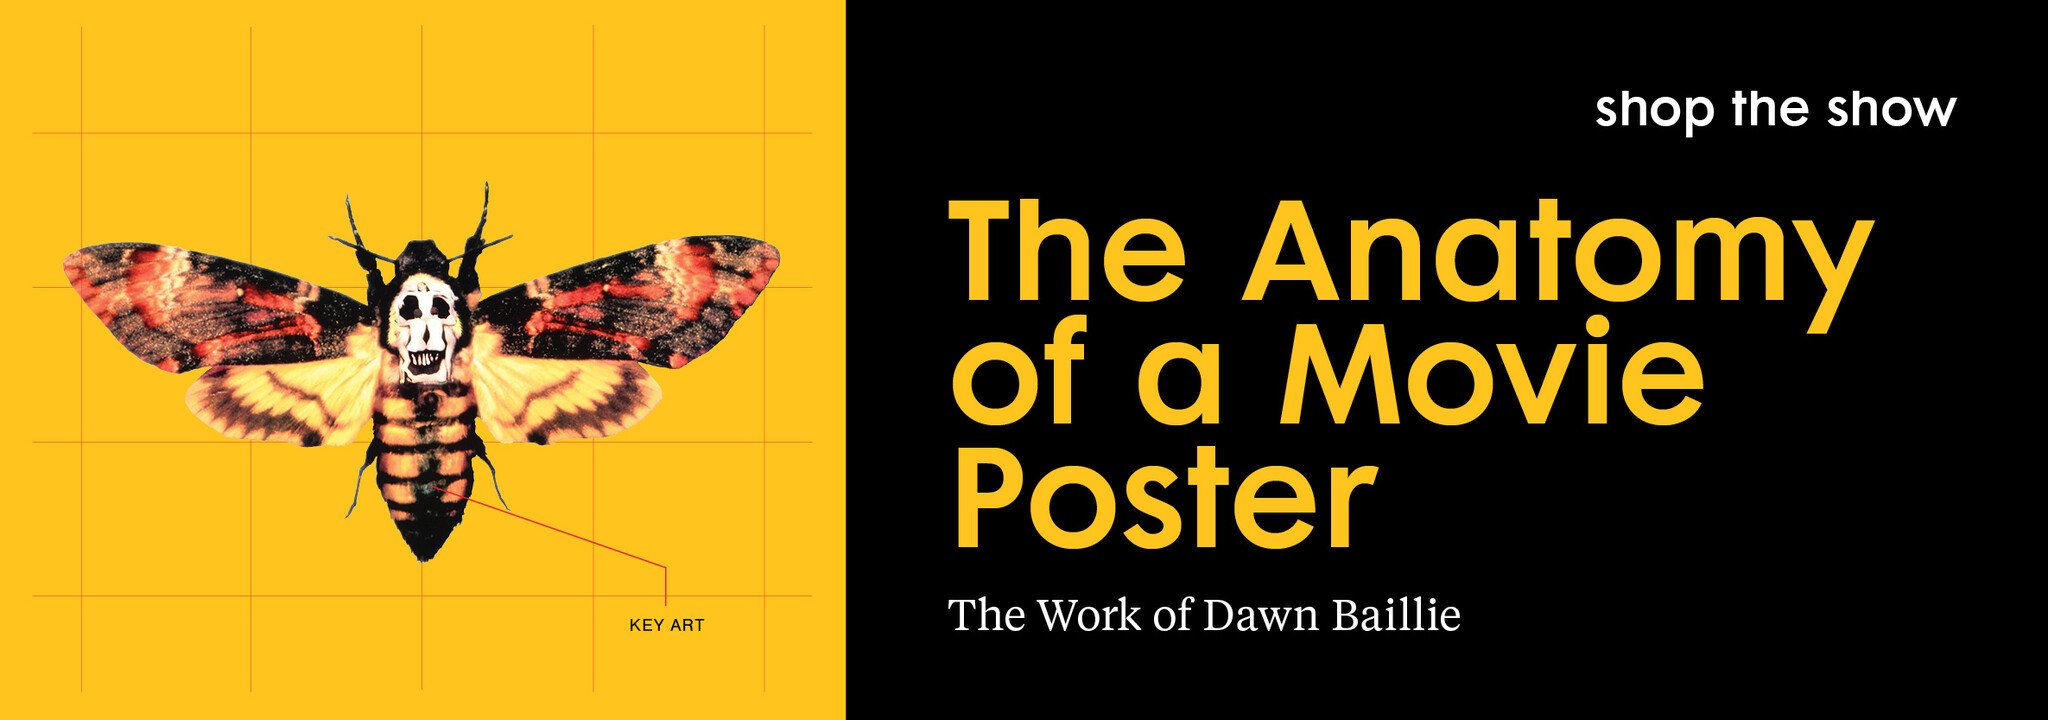 The Anatomy of a Movie Poster